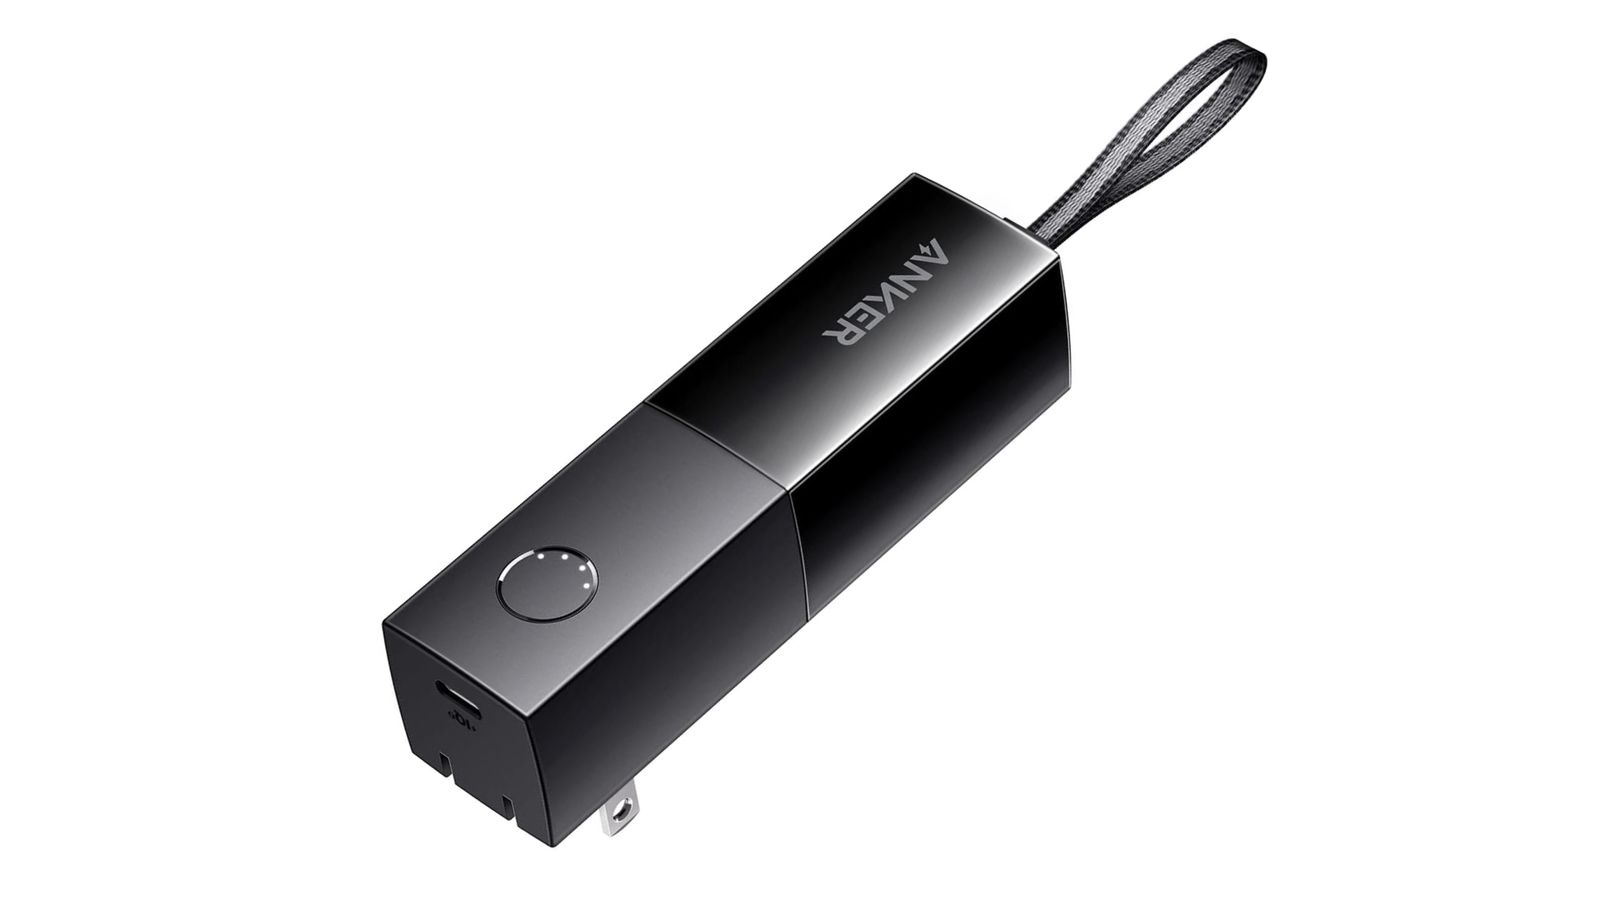 Anker PowerCore Fusion 5K product image of a small, rectangular, black power bank with a fabric handle.